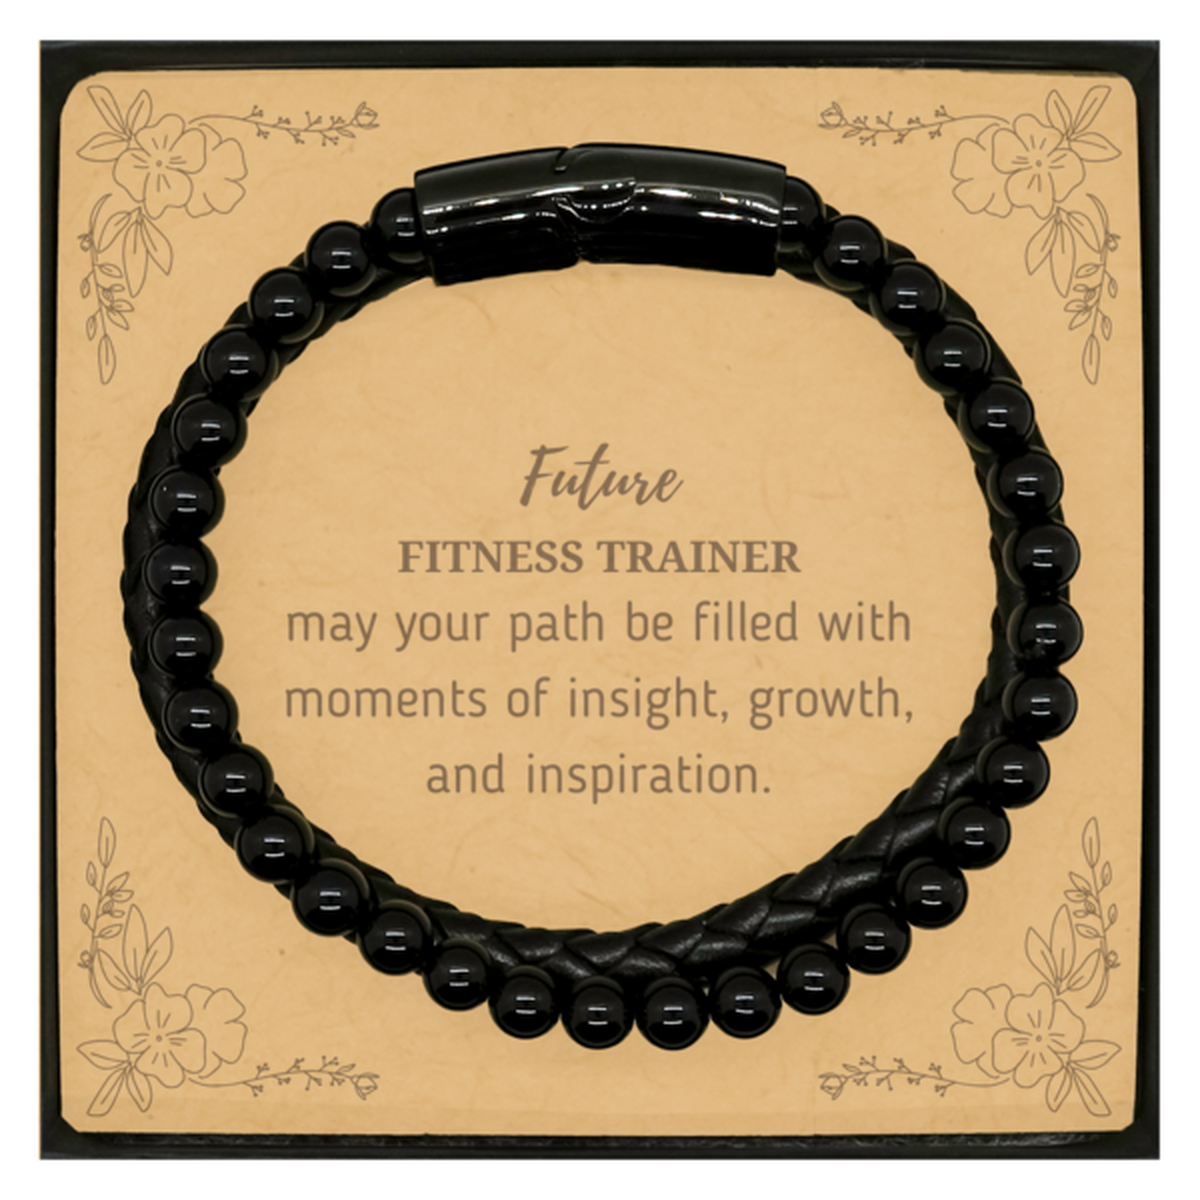 Future Fitness Trainer Gifts, May your path be filled with moments of insight, Graduation Gifts for New Fitness Trainer, Christmas Unique Stone Leather Bracelets For Men, Women, Friends